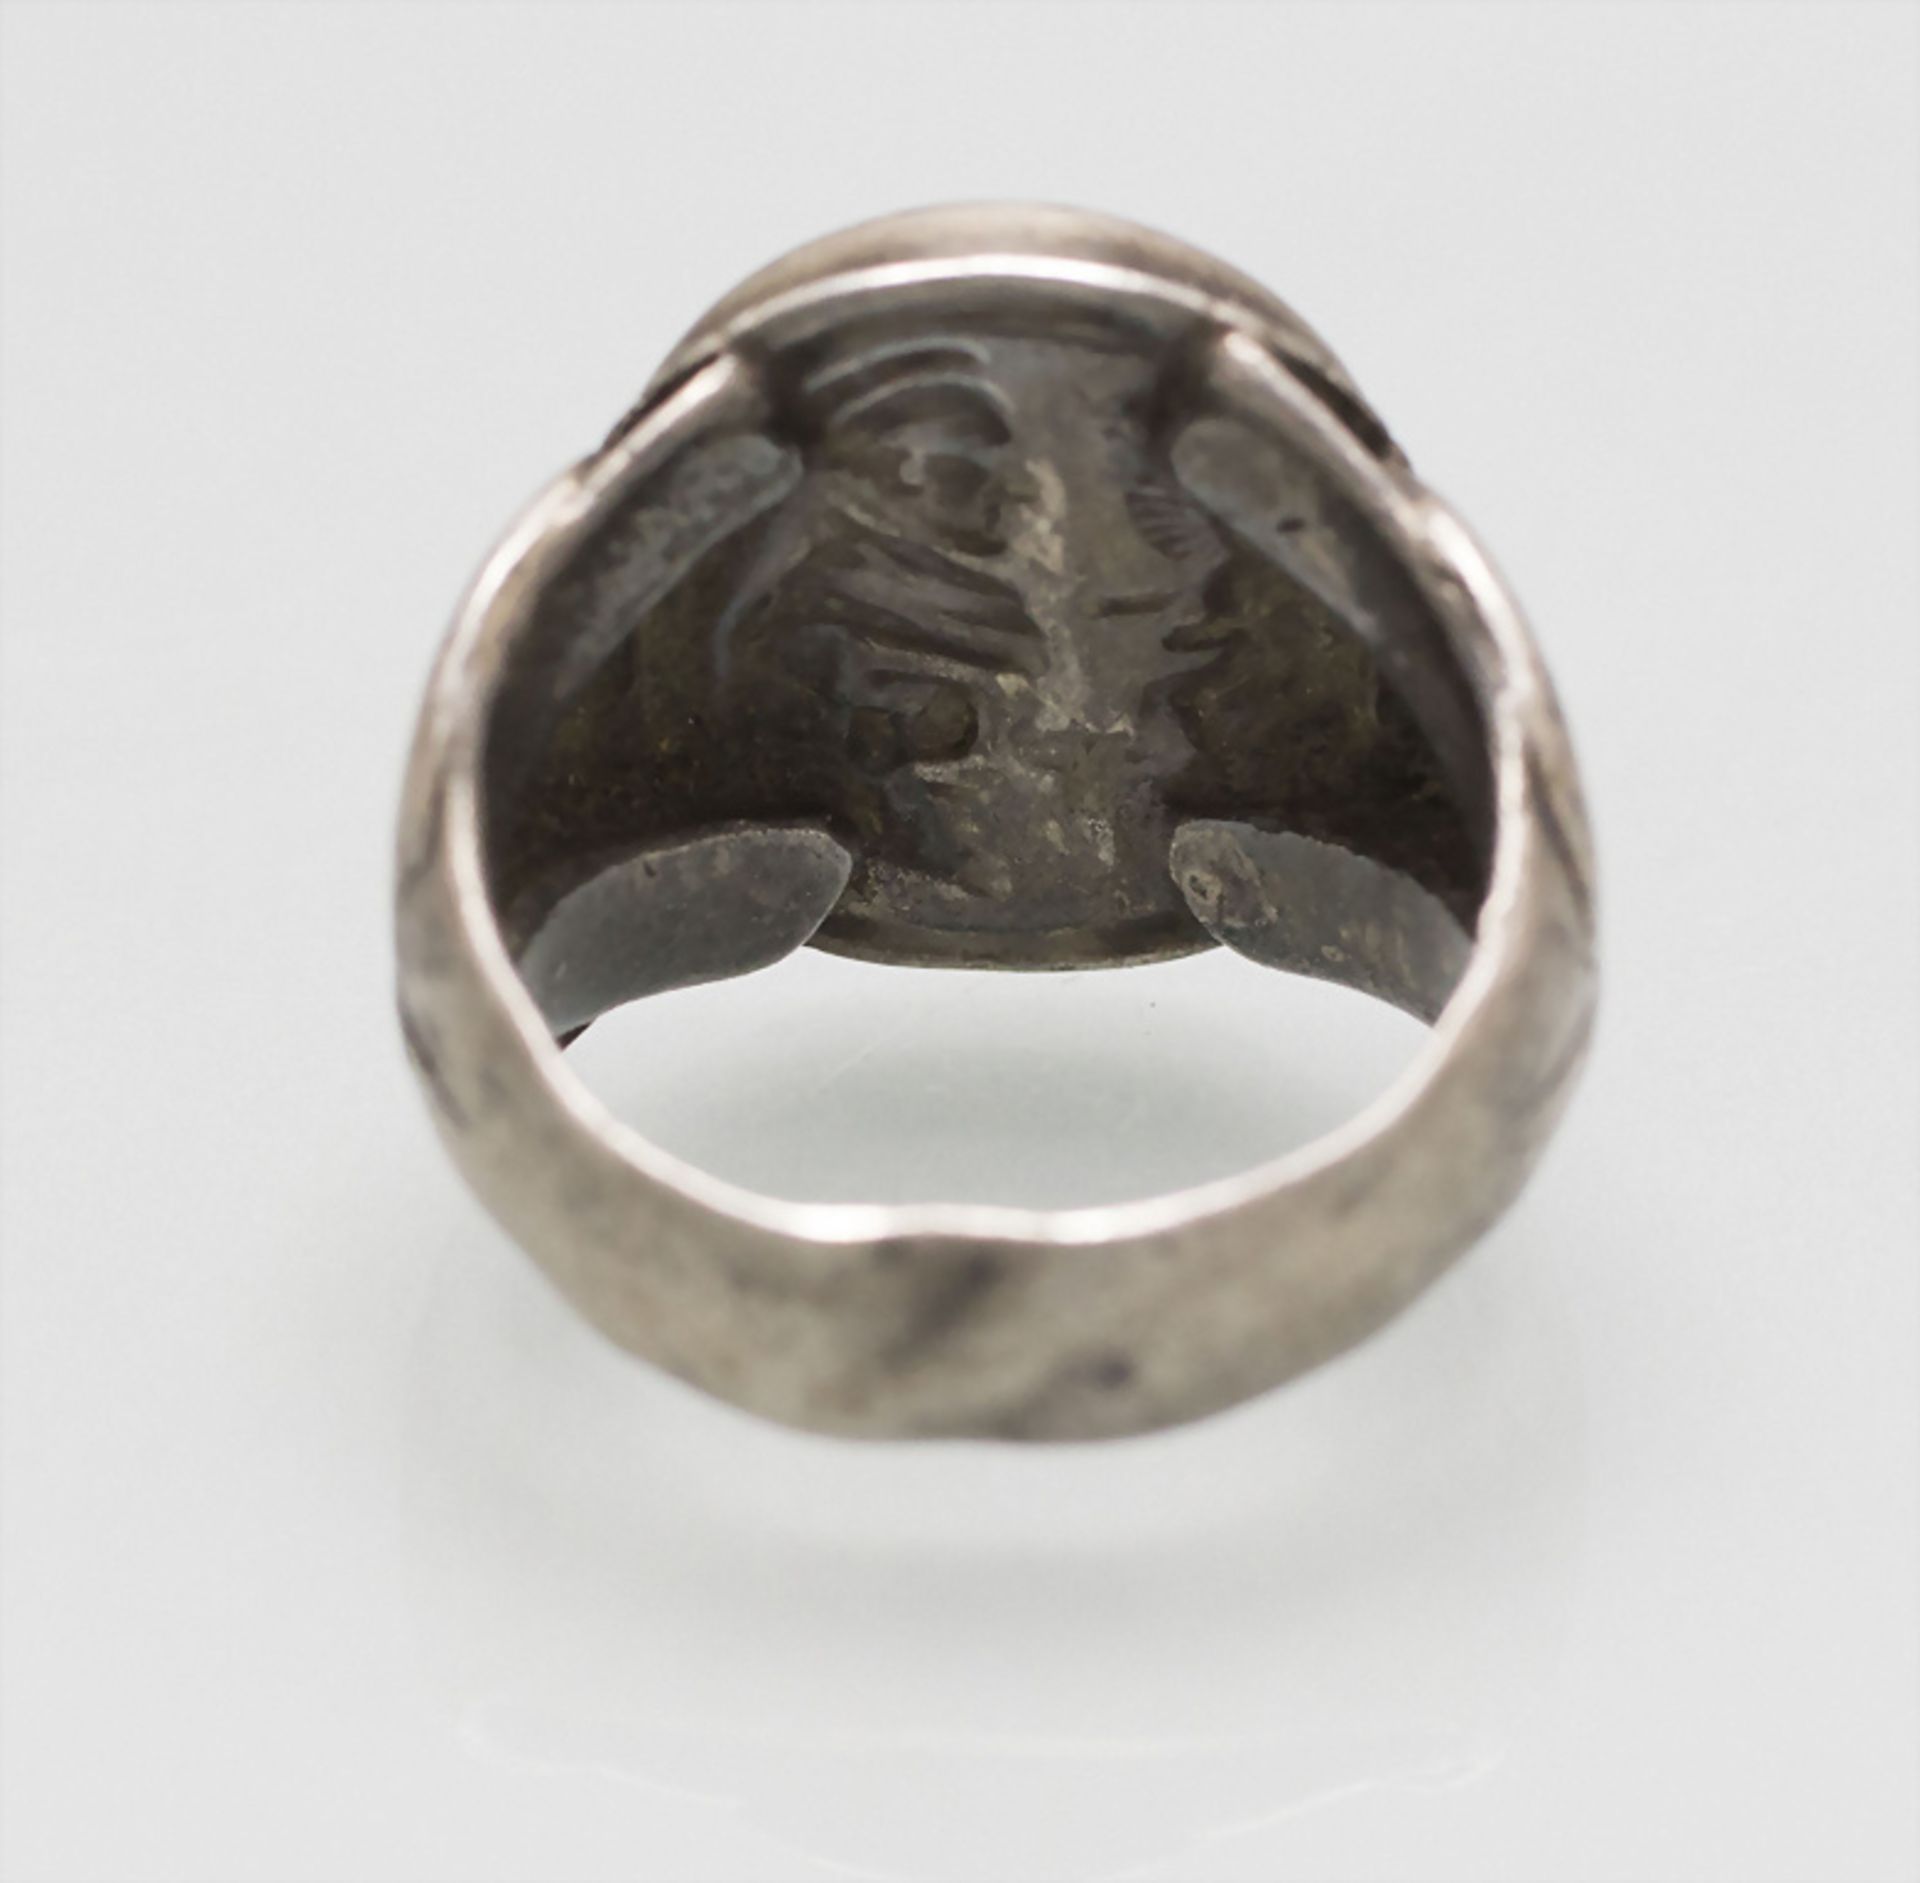 Siegelring 'Jesuskind und Priester' / A silver signet ring with Jesus as a child and a priest, ... - Image 3 of 3